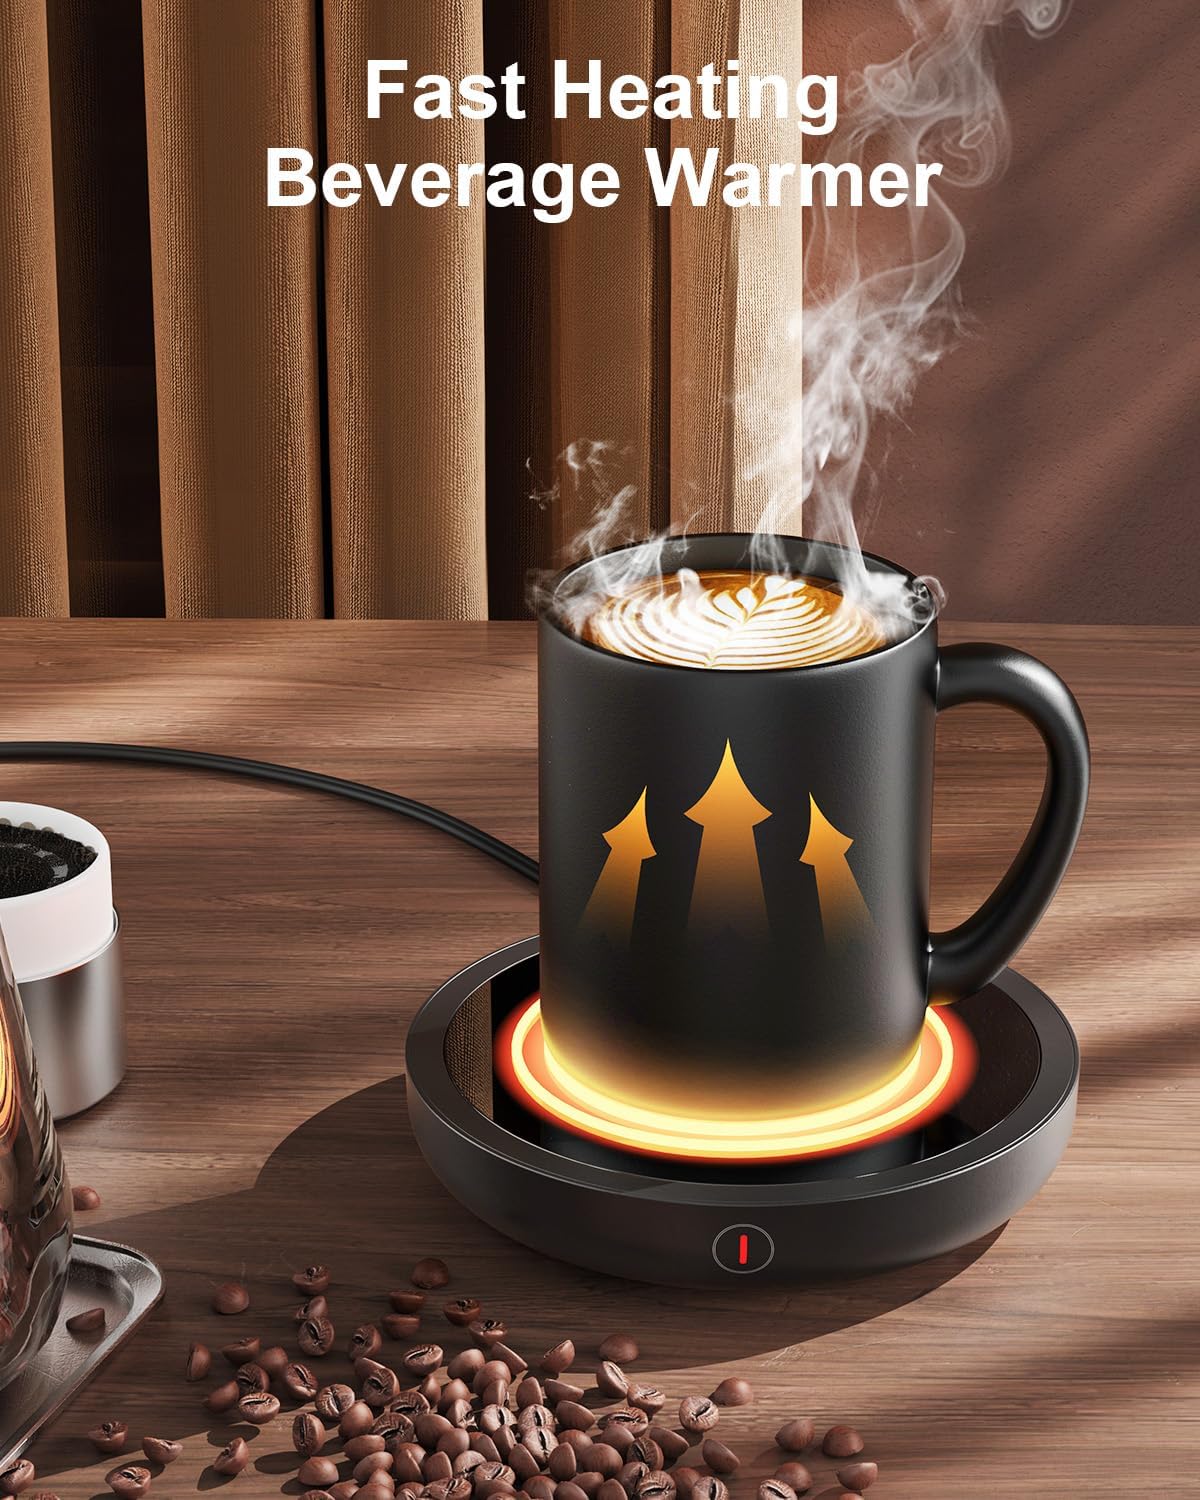 SWEETFULL Coffee Mug Warmer, 36W Electric Coffee Cup Warmer for Desk with 3-Temp Settings Advanced Temperature-Controlled Beverage Warmers Heating Plate for Coffee, Milk, Tea, Candle Wax - Wood